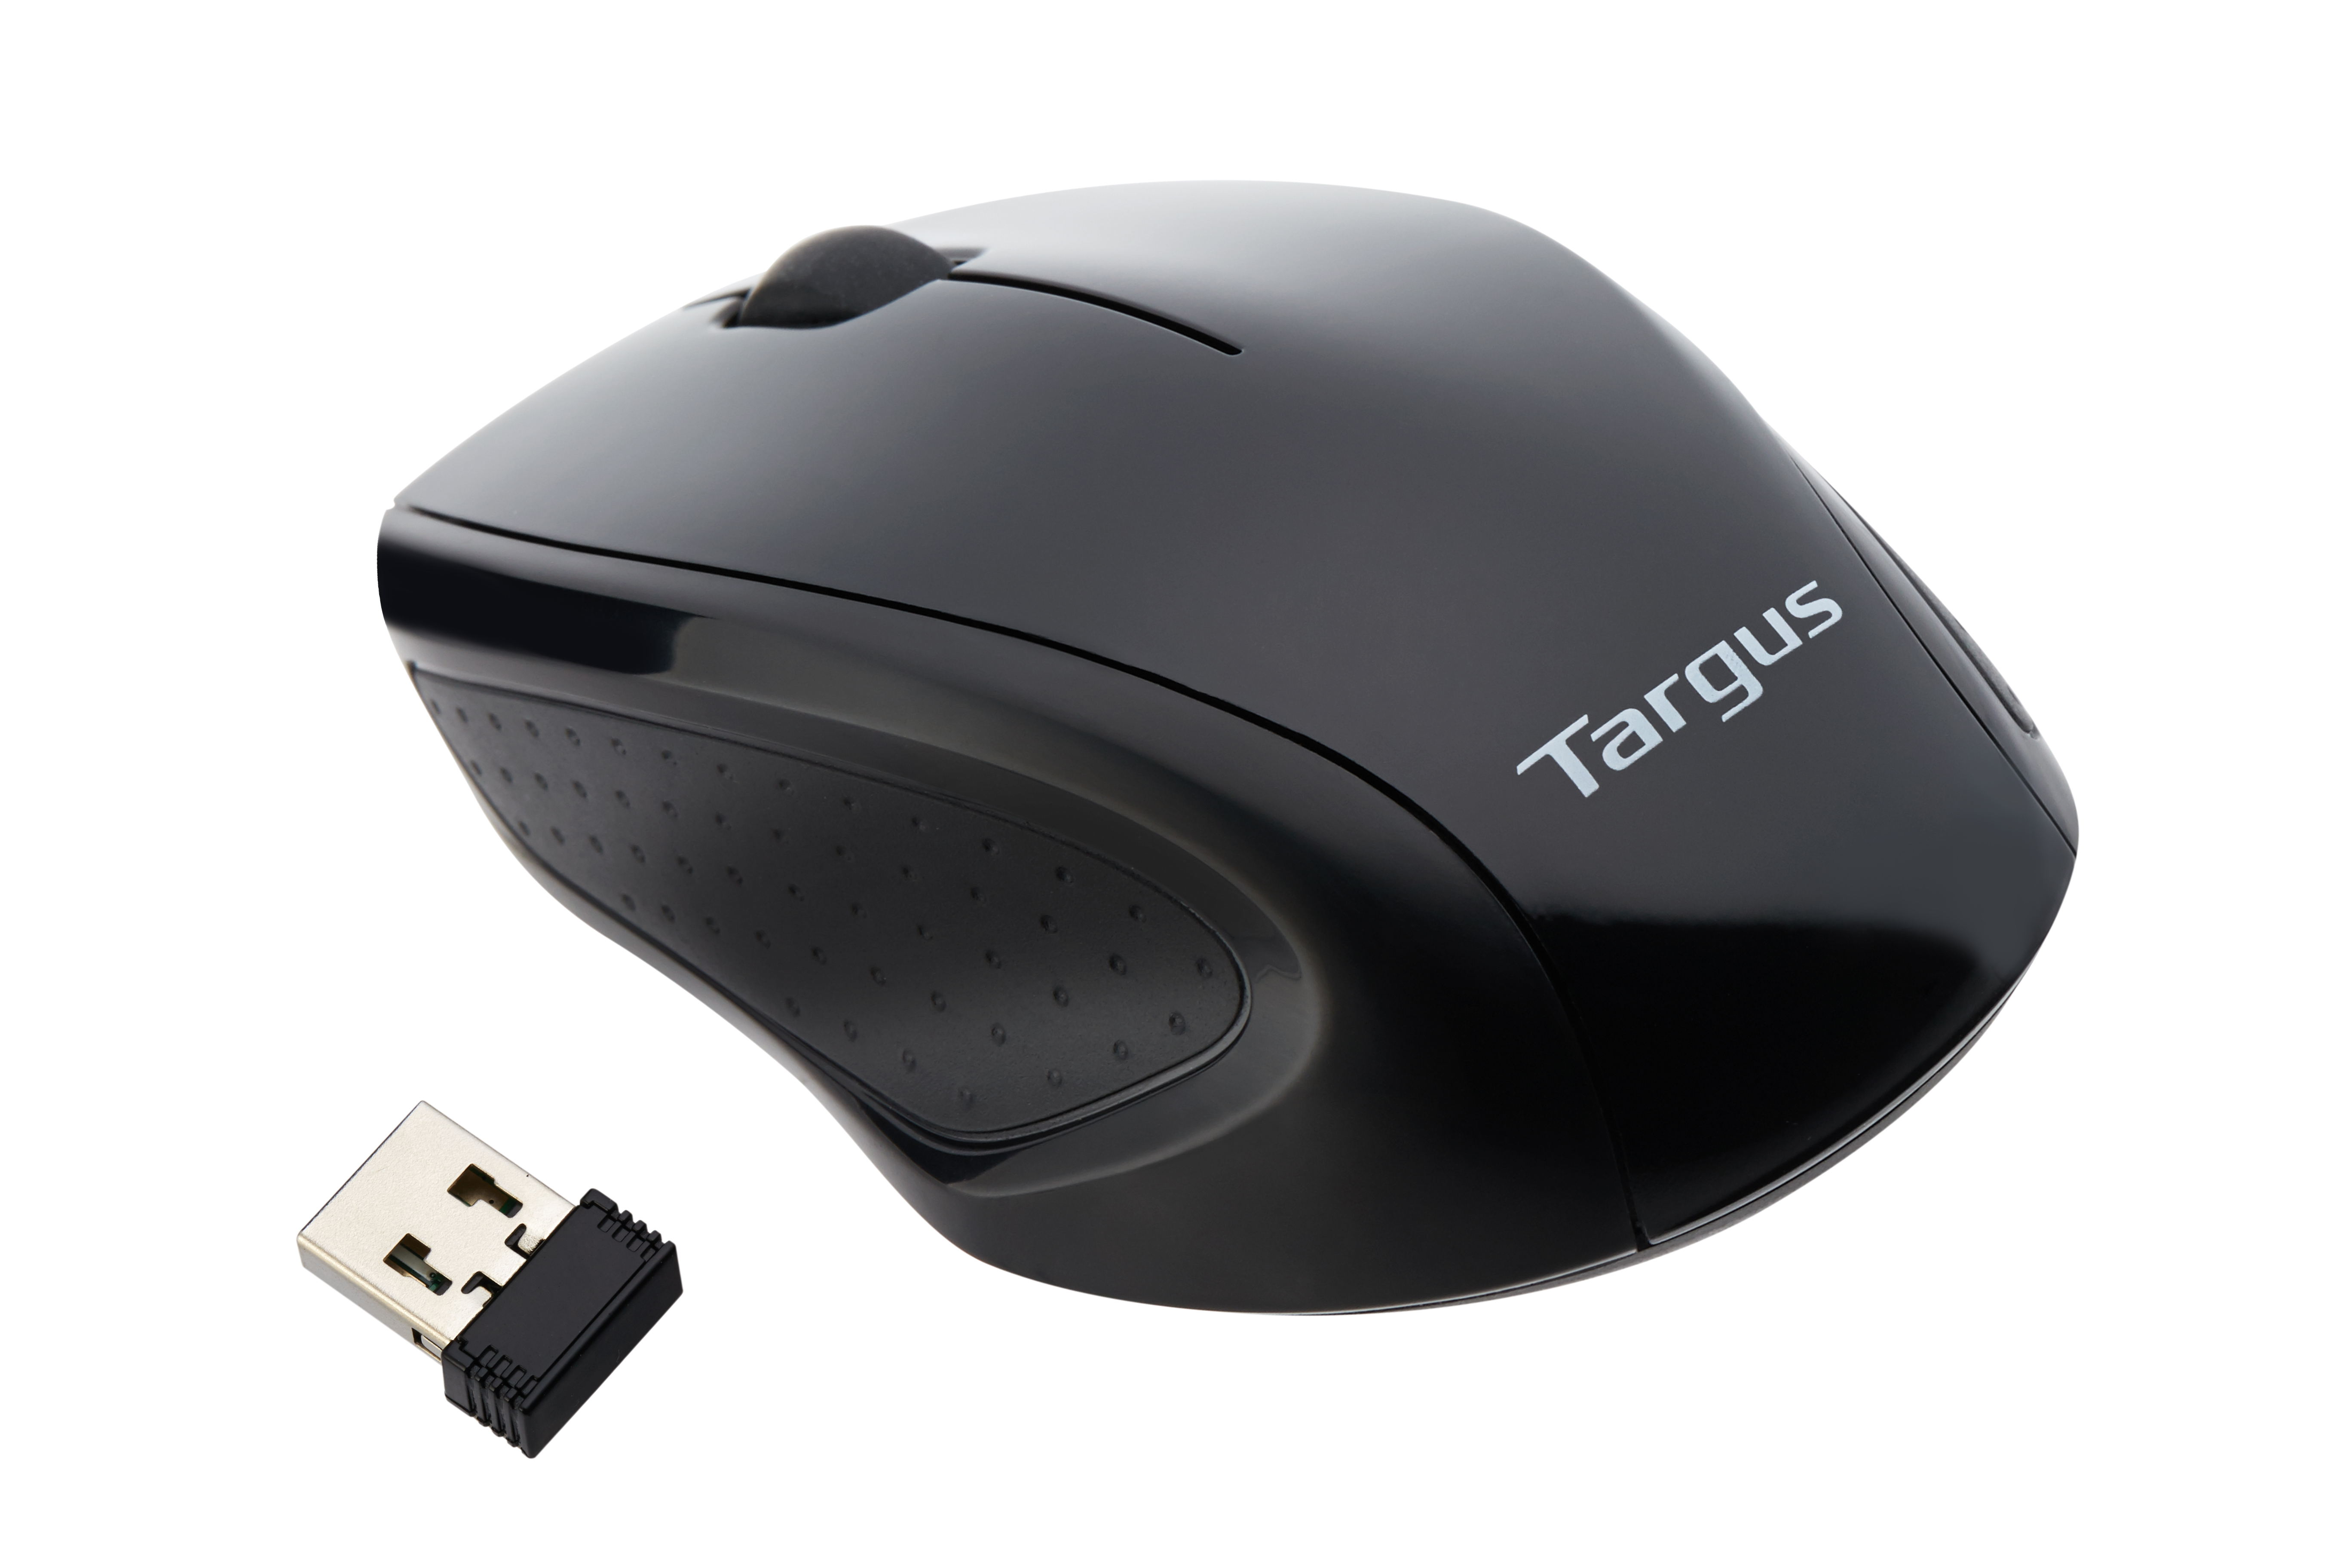 Targus Mouse Driver Download